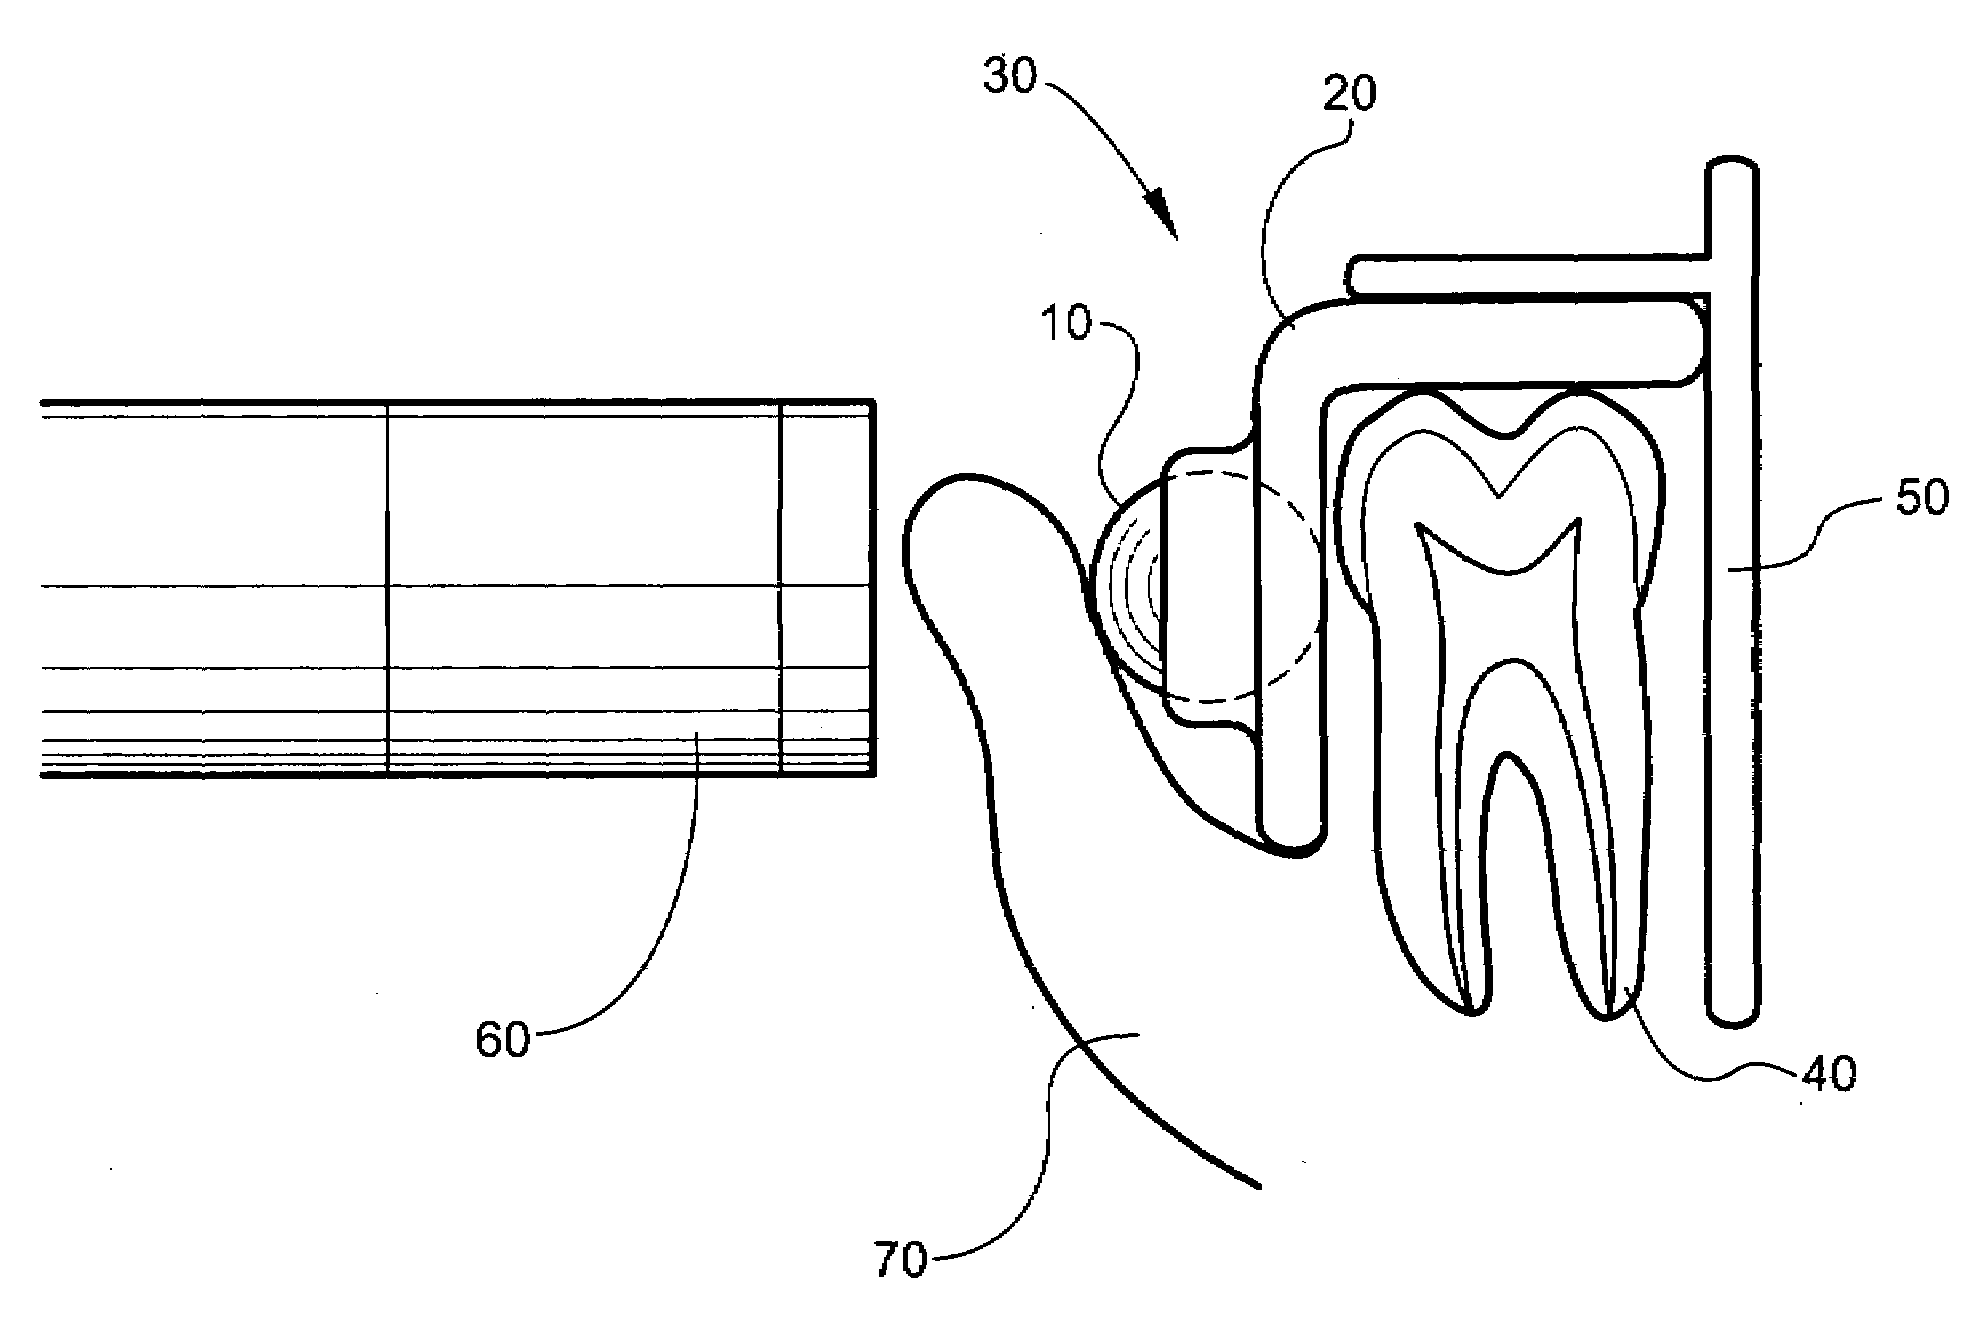 X-ray reference device and method of use